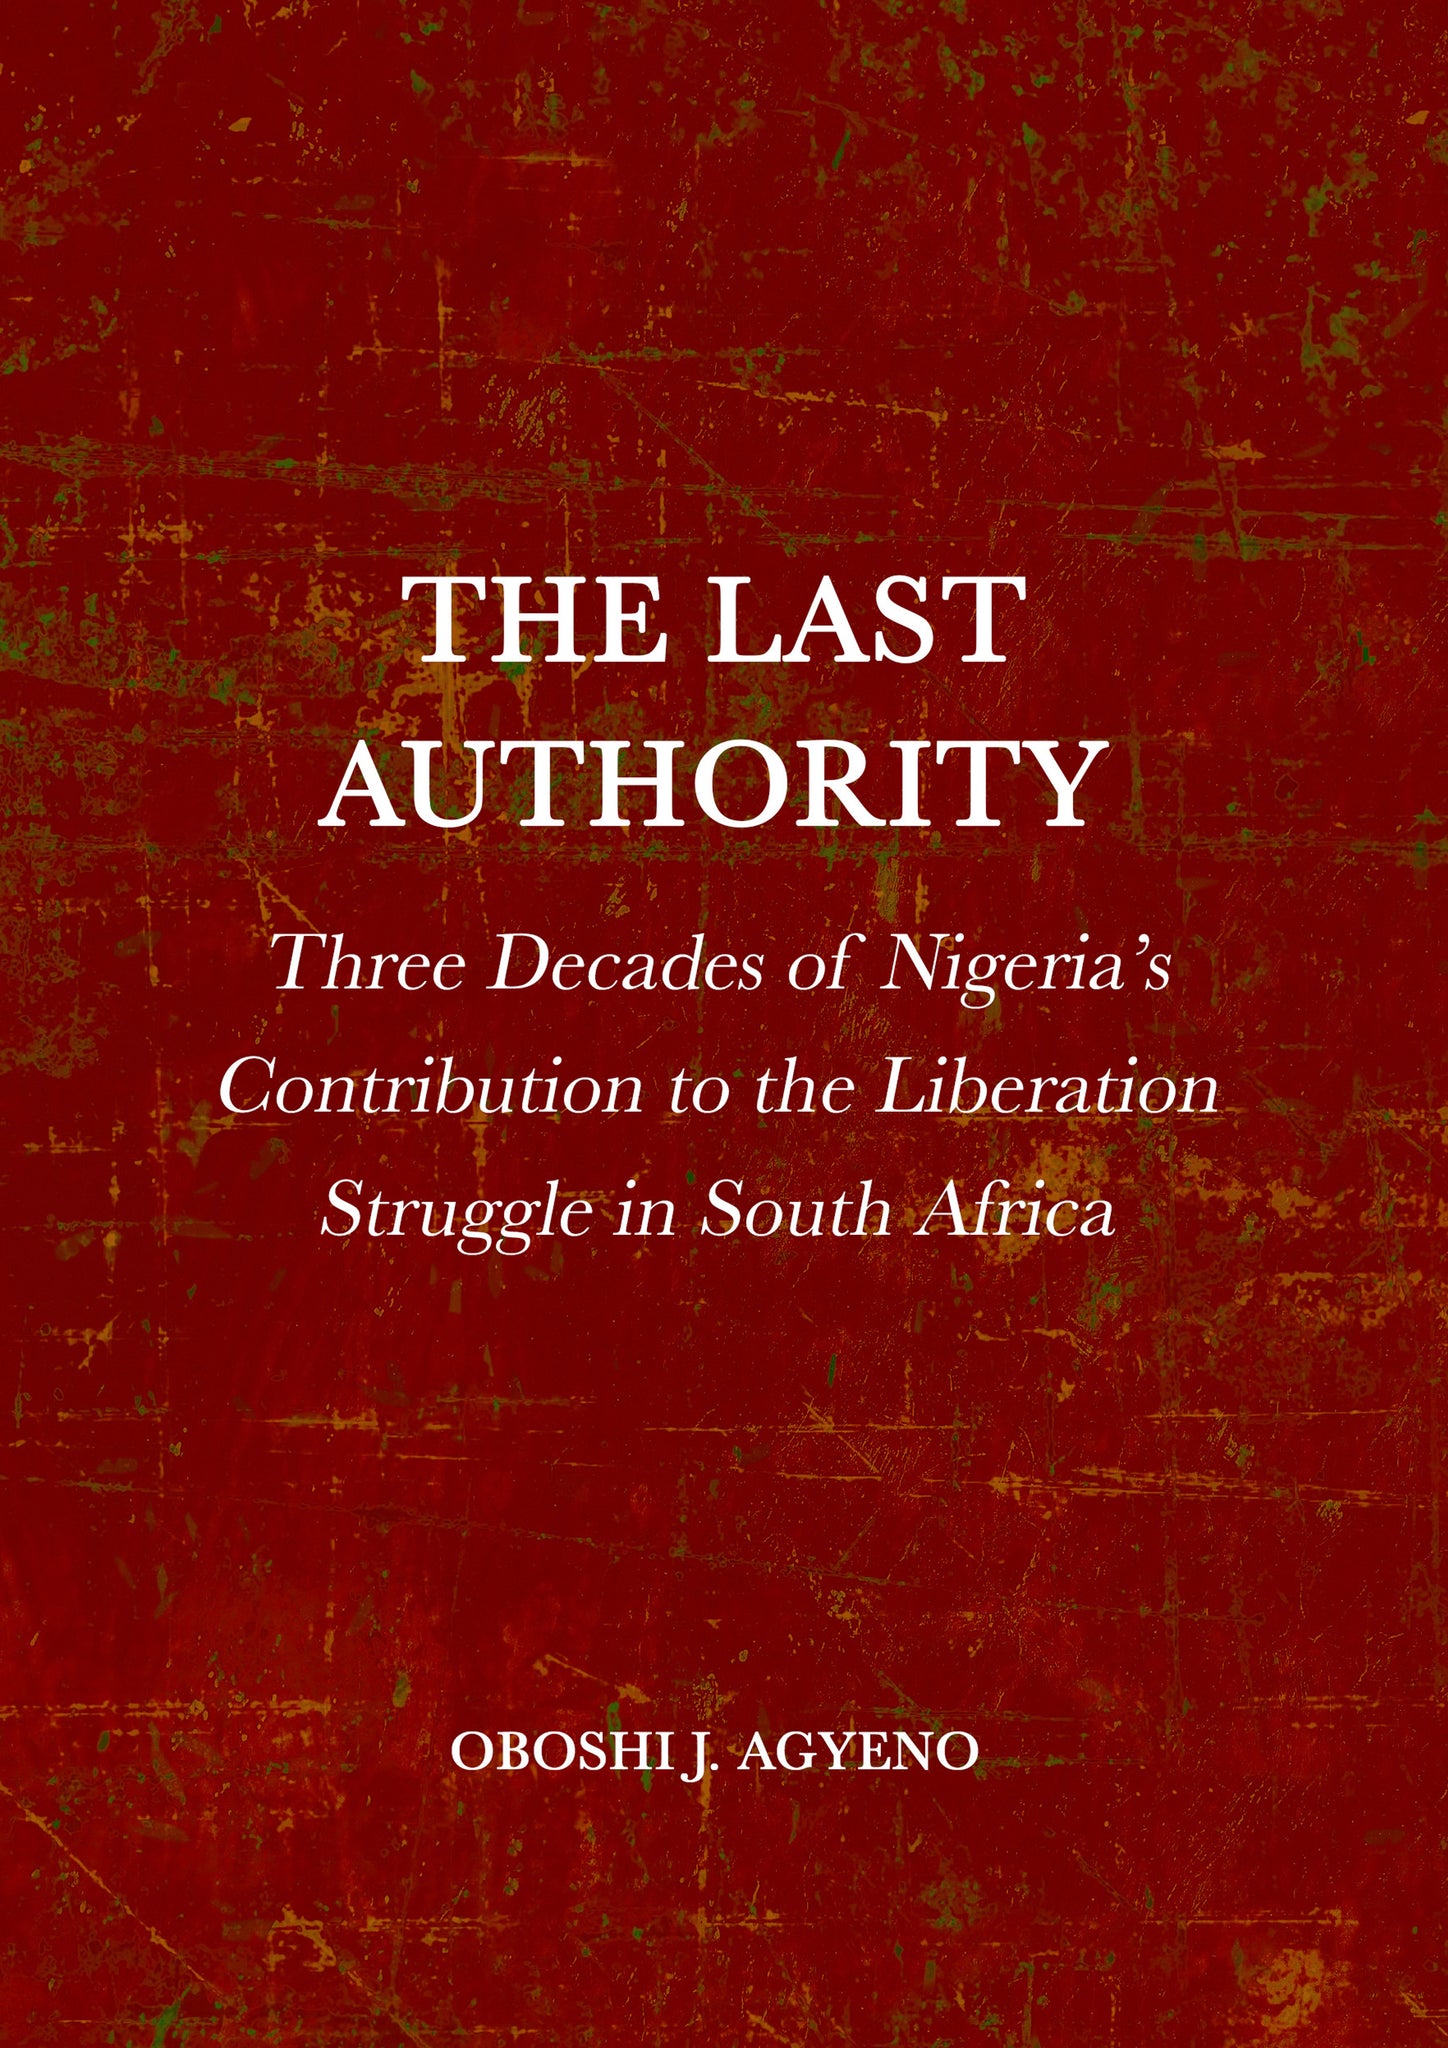 The Last Authority: Three Decades of Nigeria’s Contribution to the Liberation Struggle in South Africa